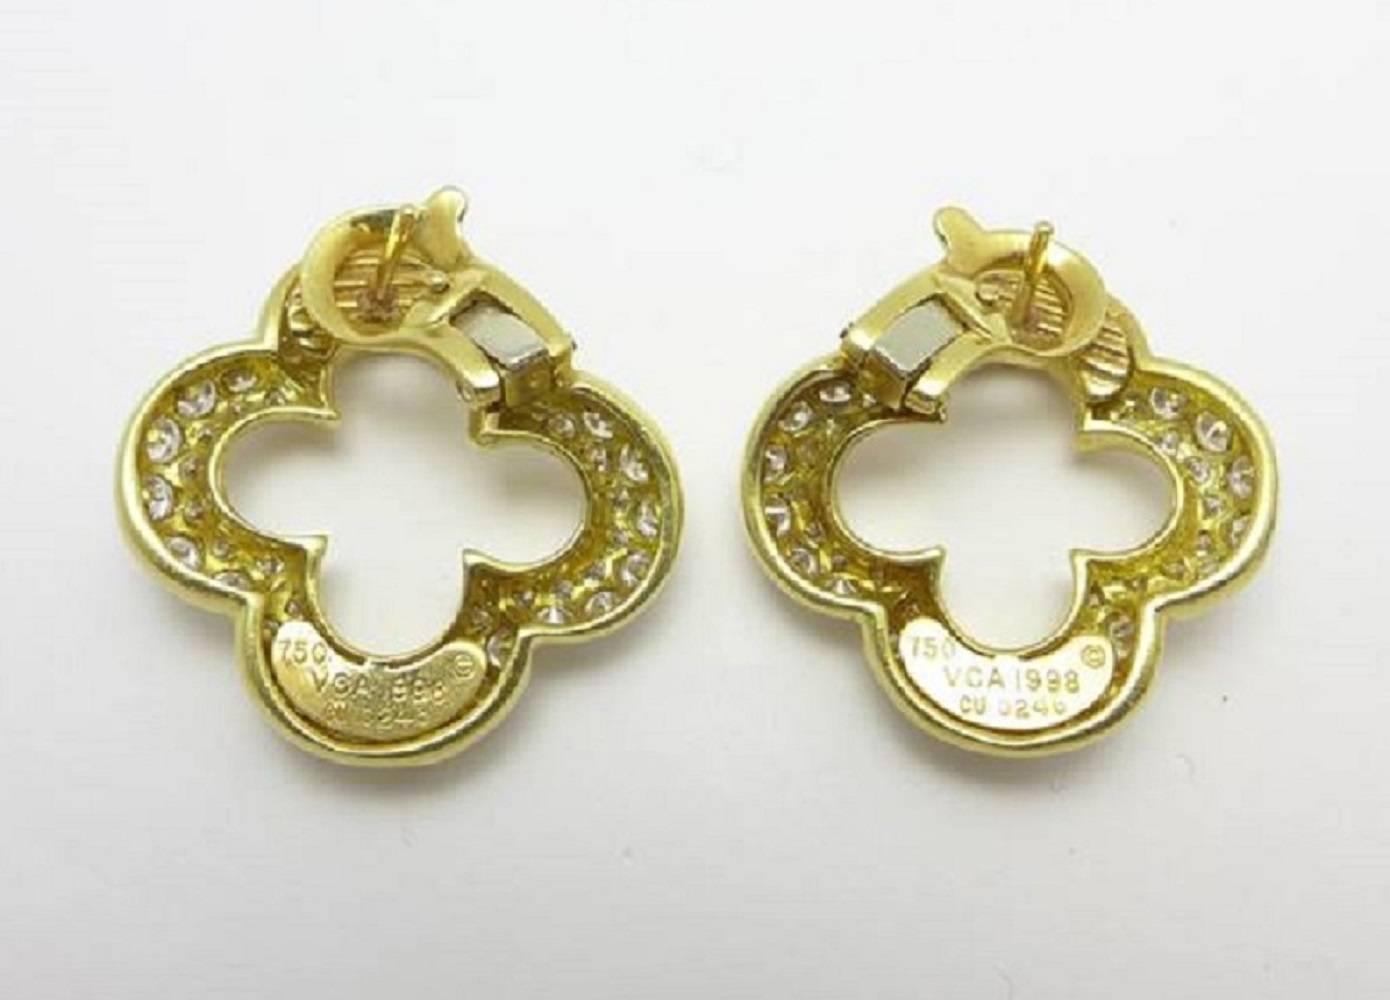 18kt  Vintage Van Cleef & Arpels Alhambra clover-shaped clip on earrings, with pavé-set round diamonds weighing approximately 3.00 total carats in VVS clarity and F color, mounted in 18k yellow gold with a perfected clover frame. Featuring clip